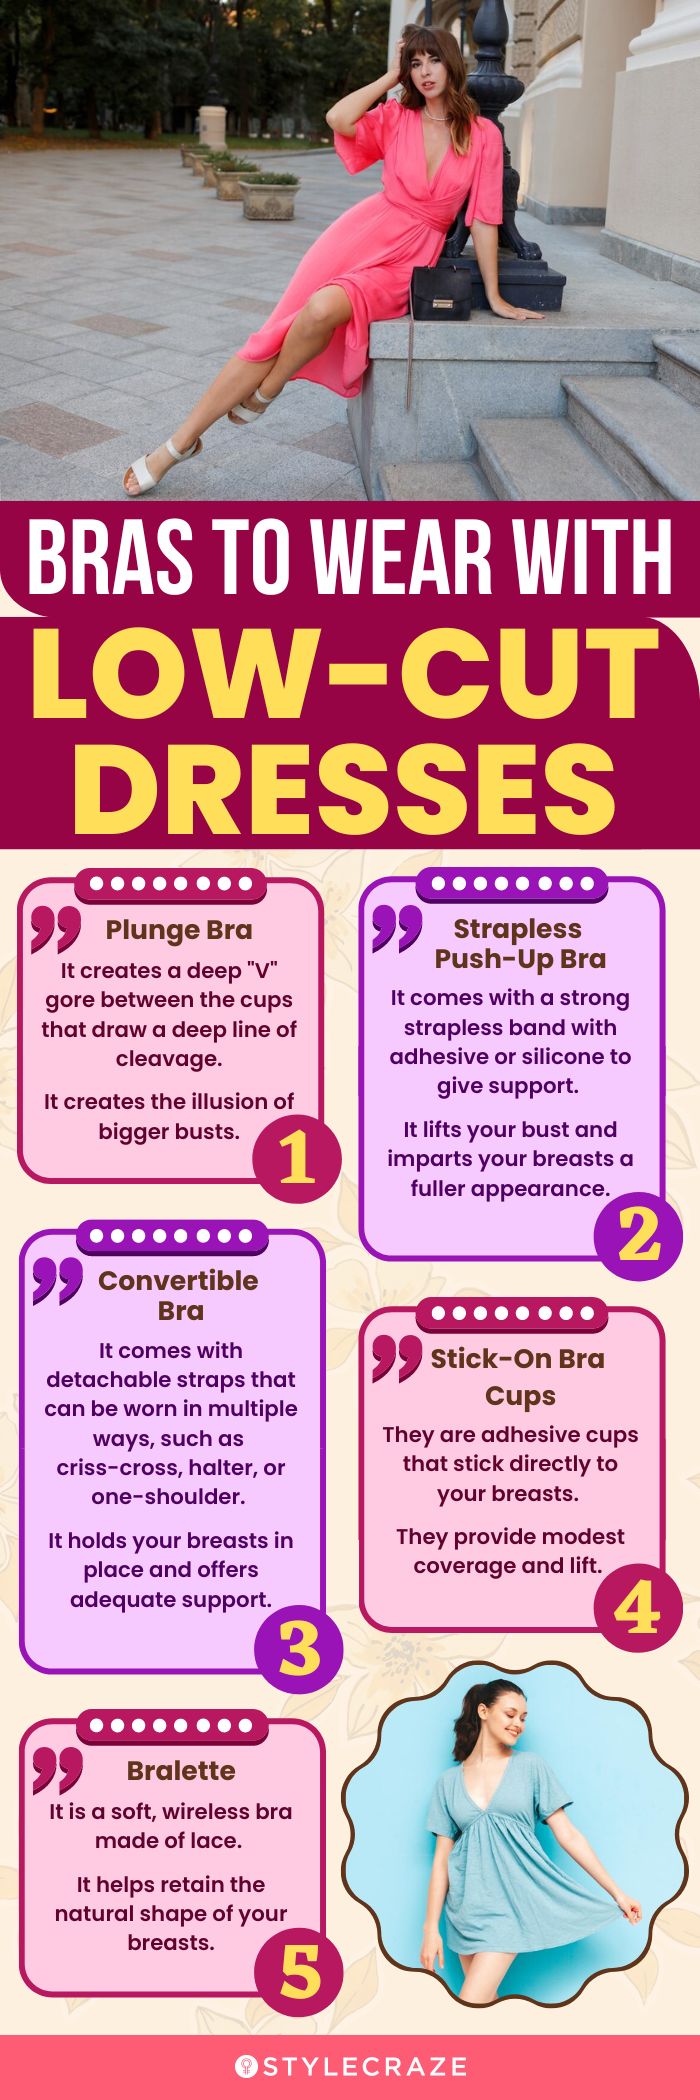 Bras To Wear With Low-Cut Dresses (infographic)